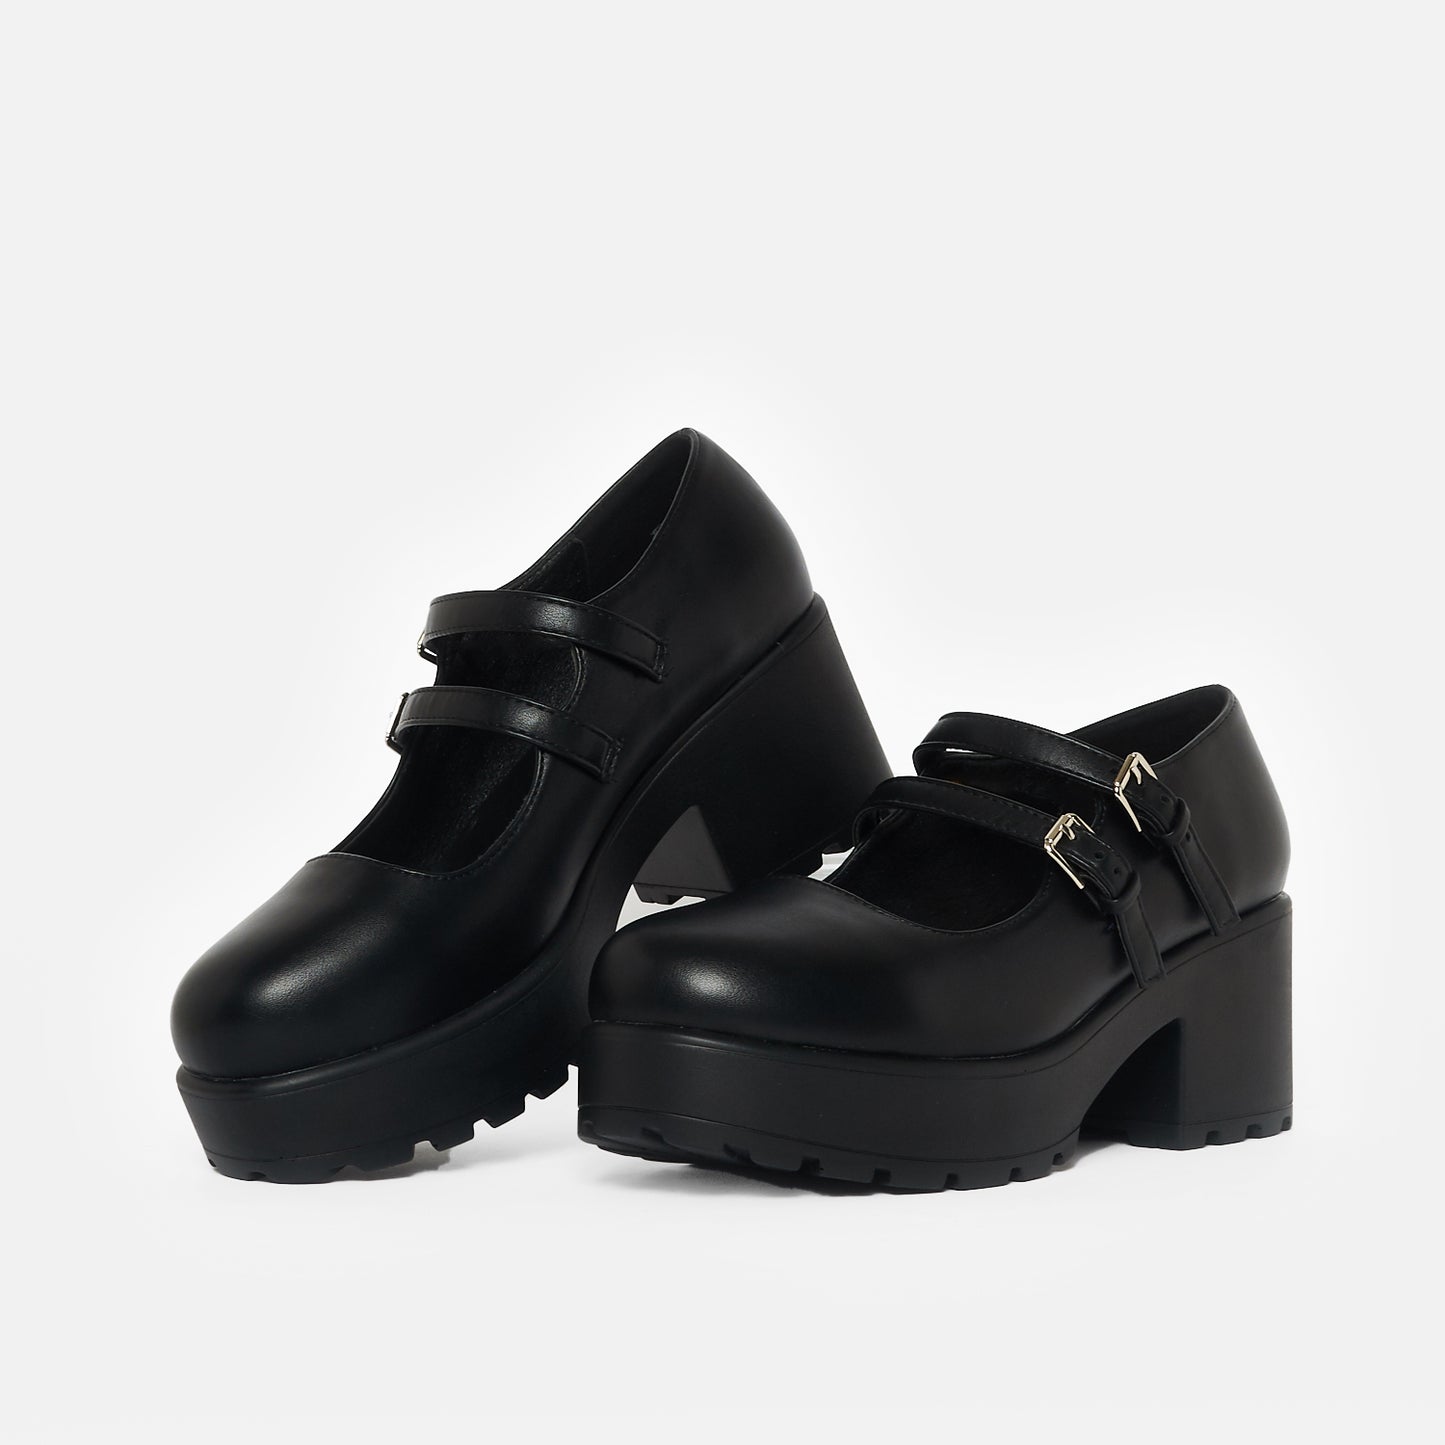 Mura Double Strap Shoes - Mary Janes - KOI Footwear - Black - Three-Quarter View